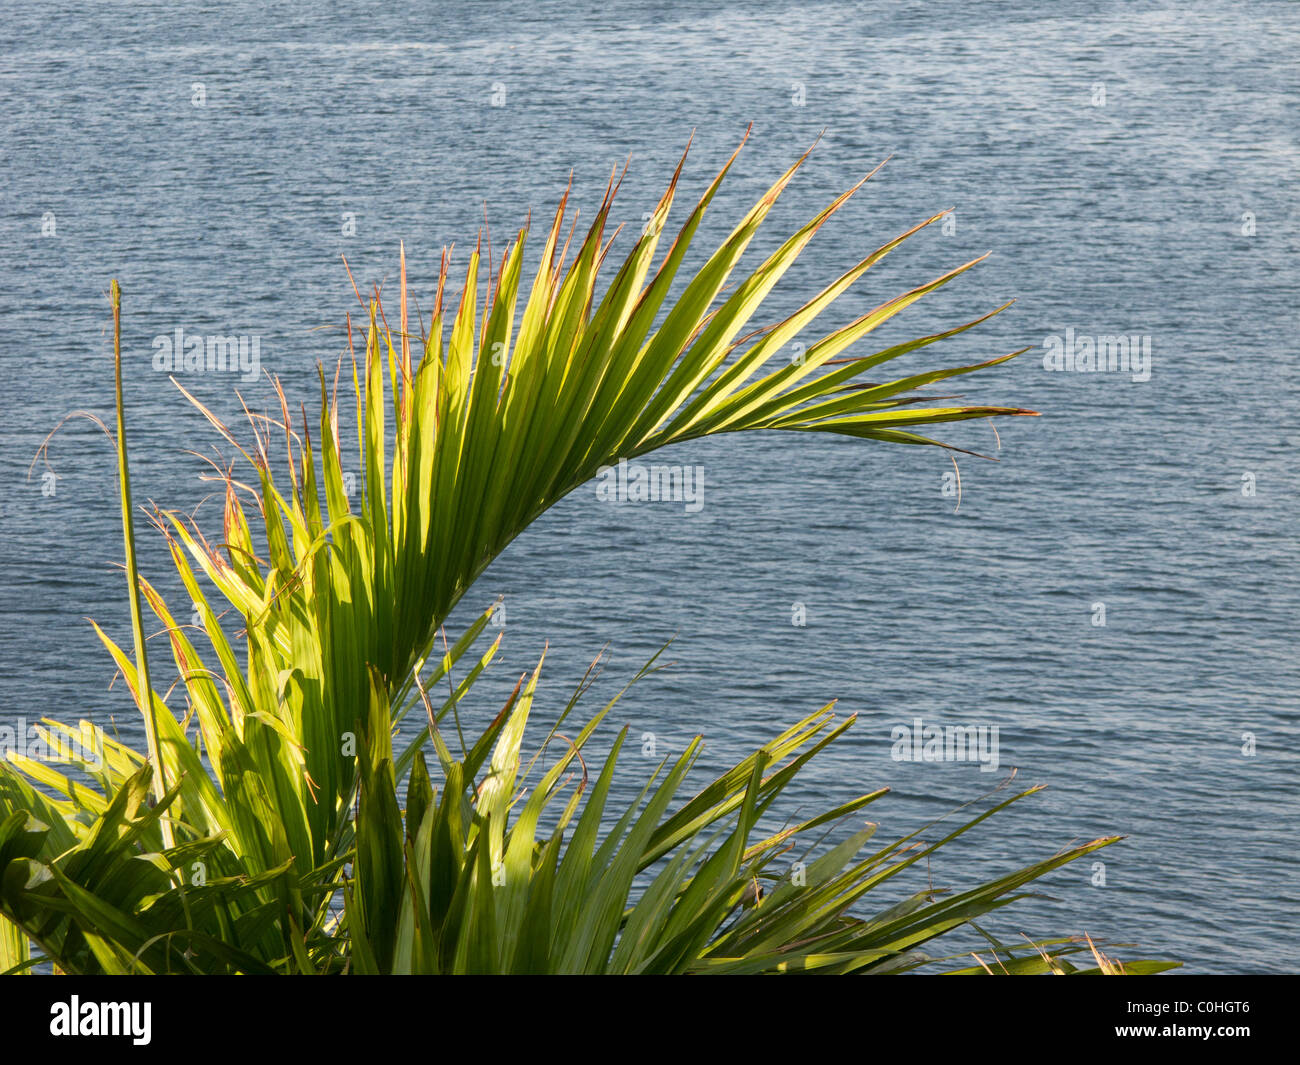 Palm frond over ocean. Stock Photo